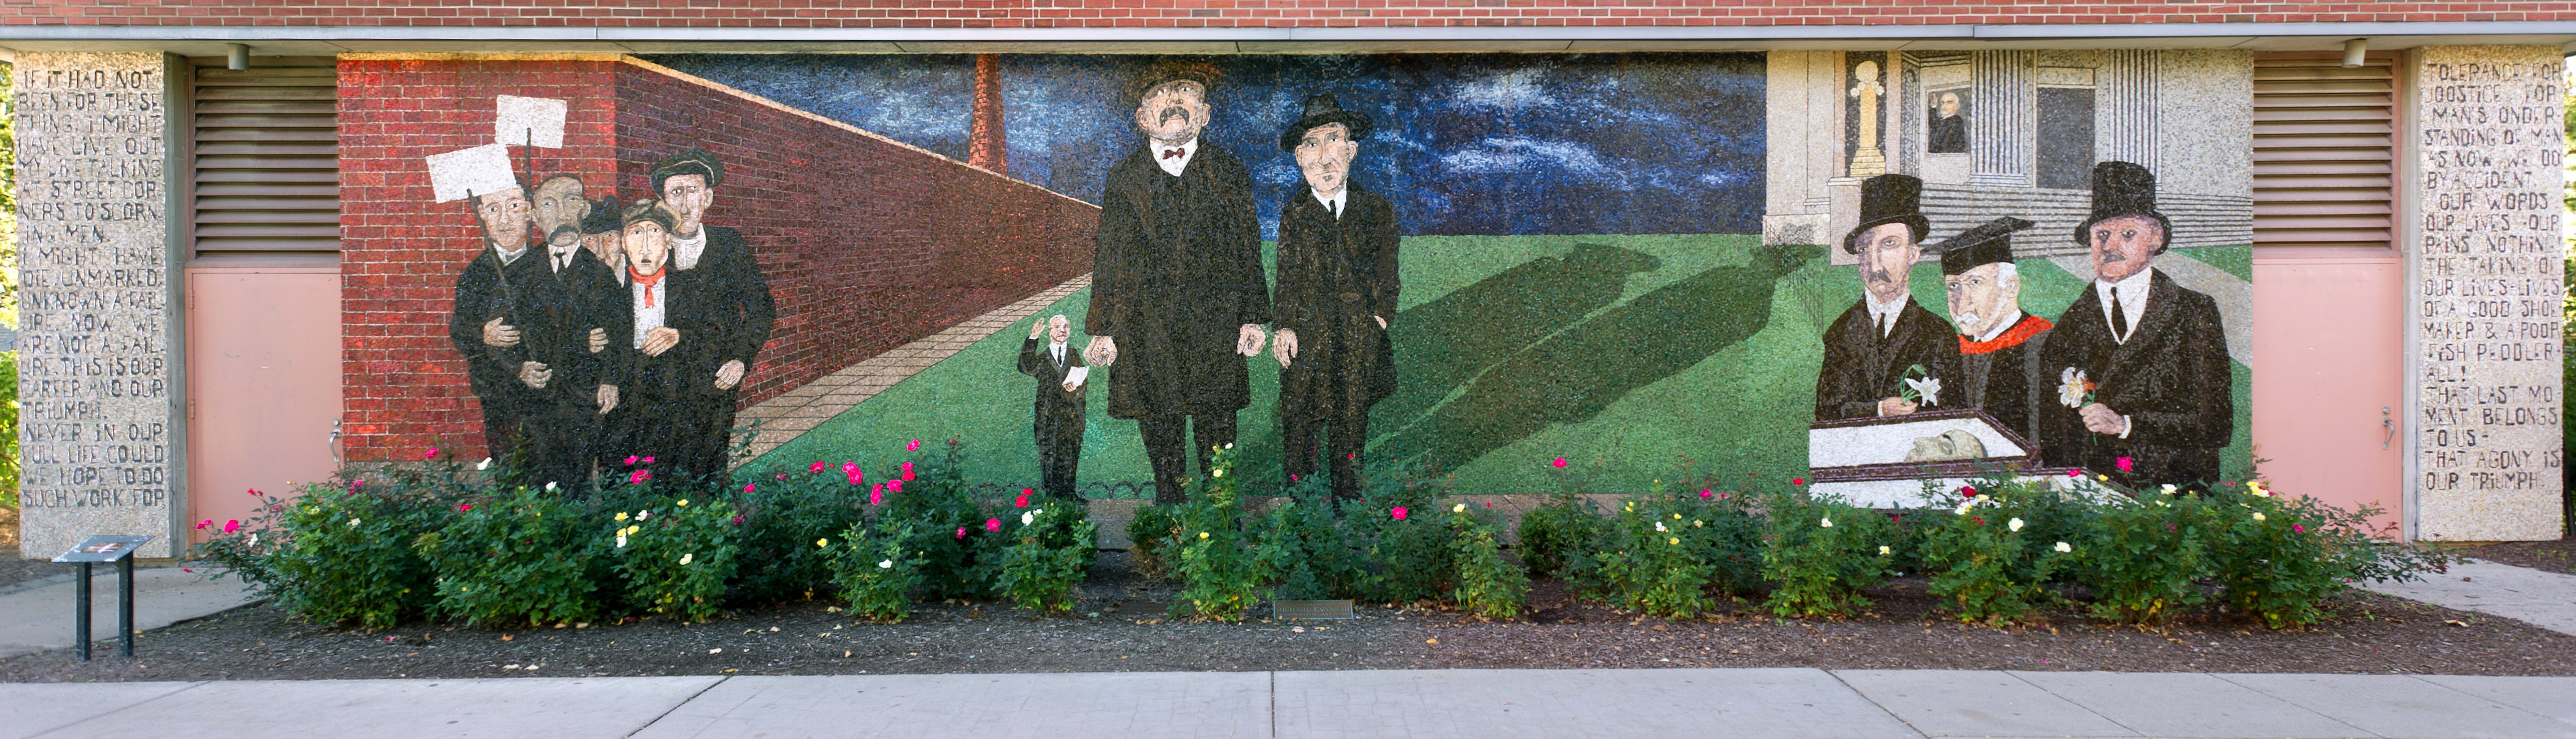 Sacco and Venzetti mosiac on the east wall of HB Crouse